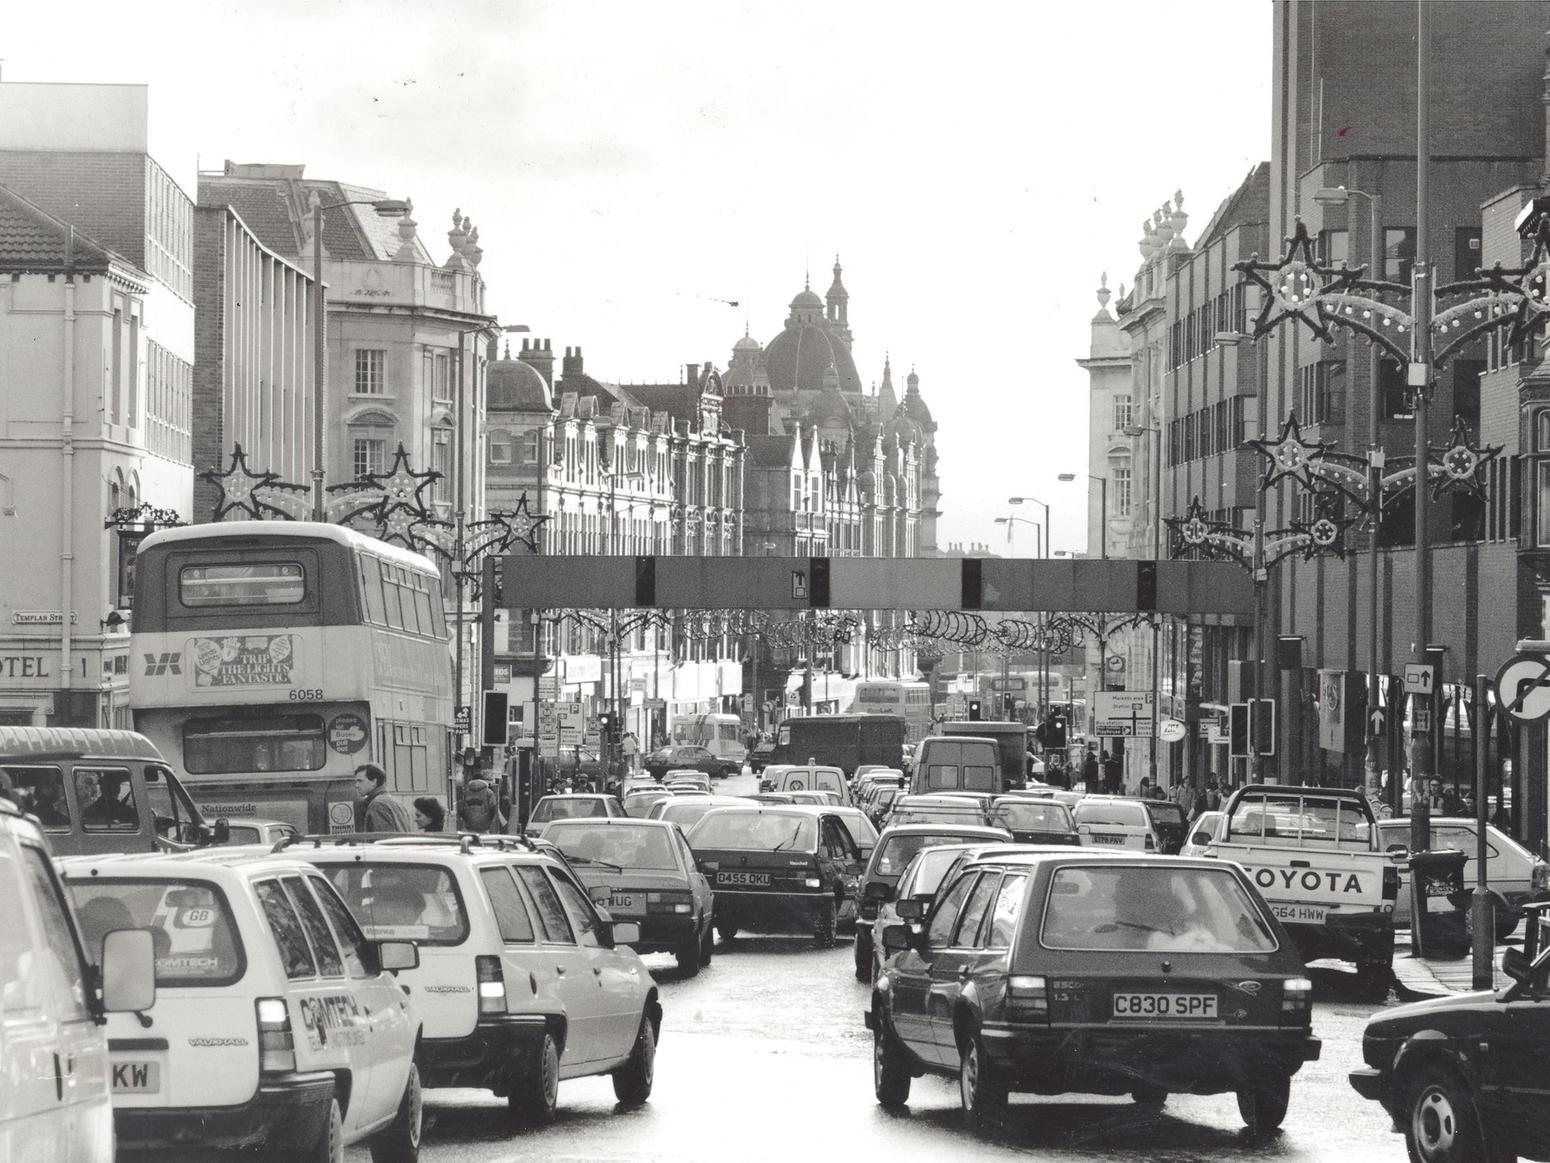 Vicar Lane is choked by traffic congestion in the mid-1990s.